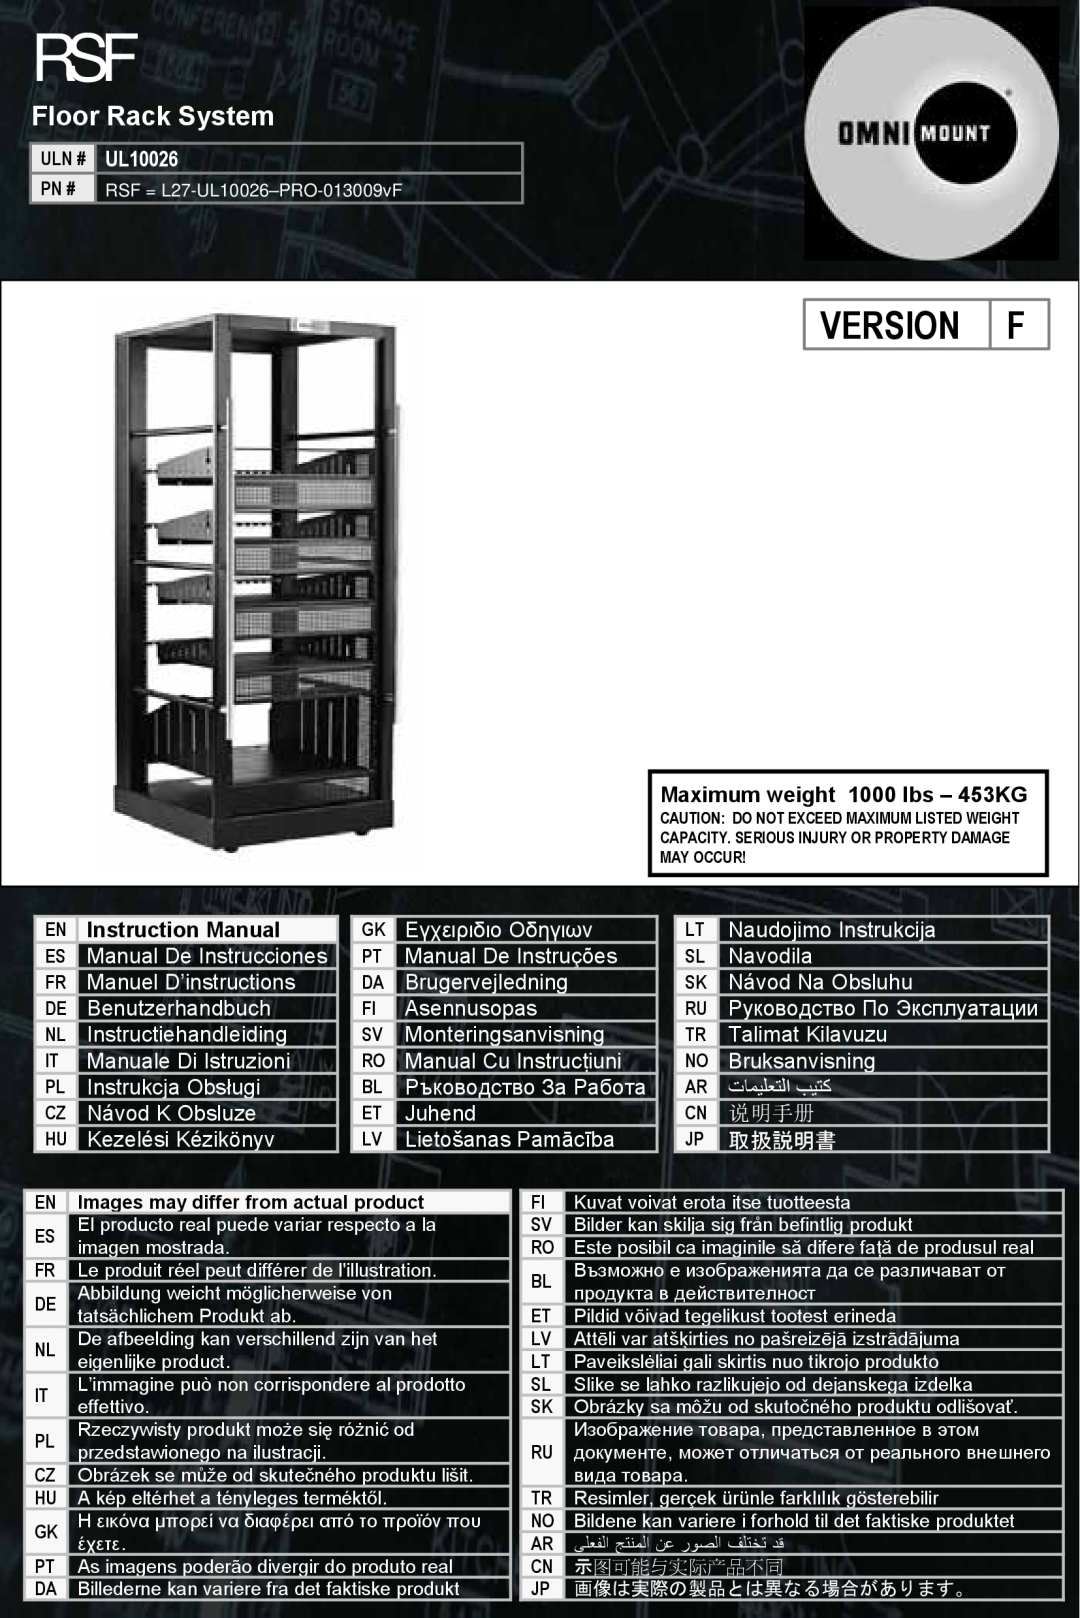 Omnimount RSF instruction manual Floor Rack System, Version, Maximum weight 1000 lbs – 453KG, Instruction Manual, 说明手册 